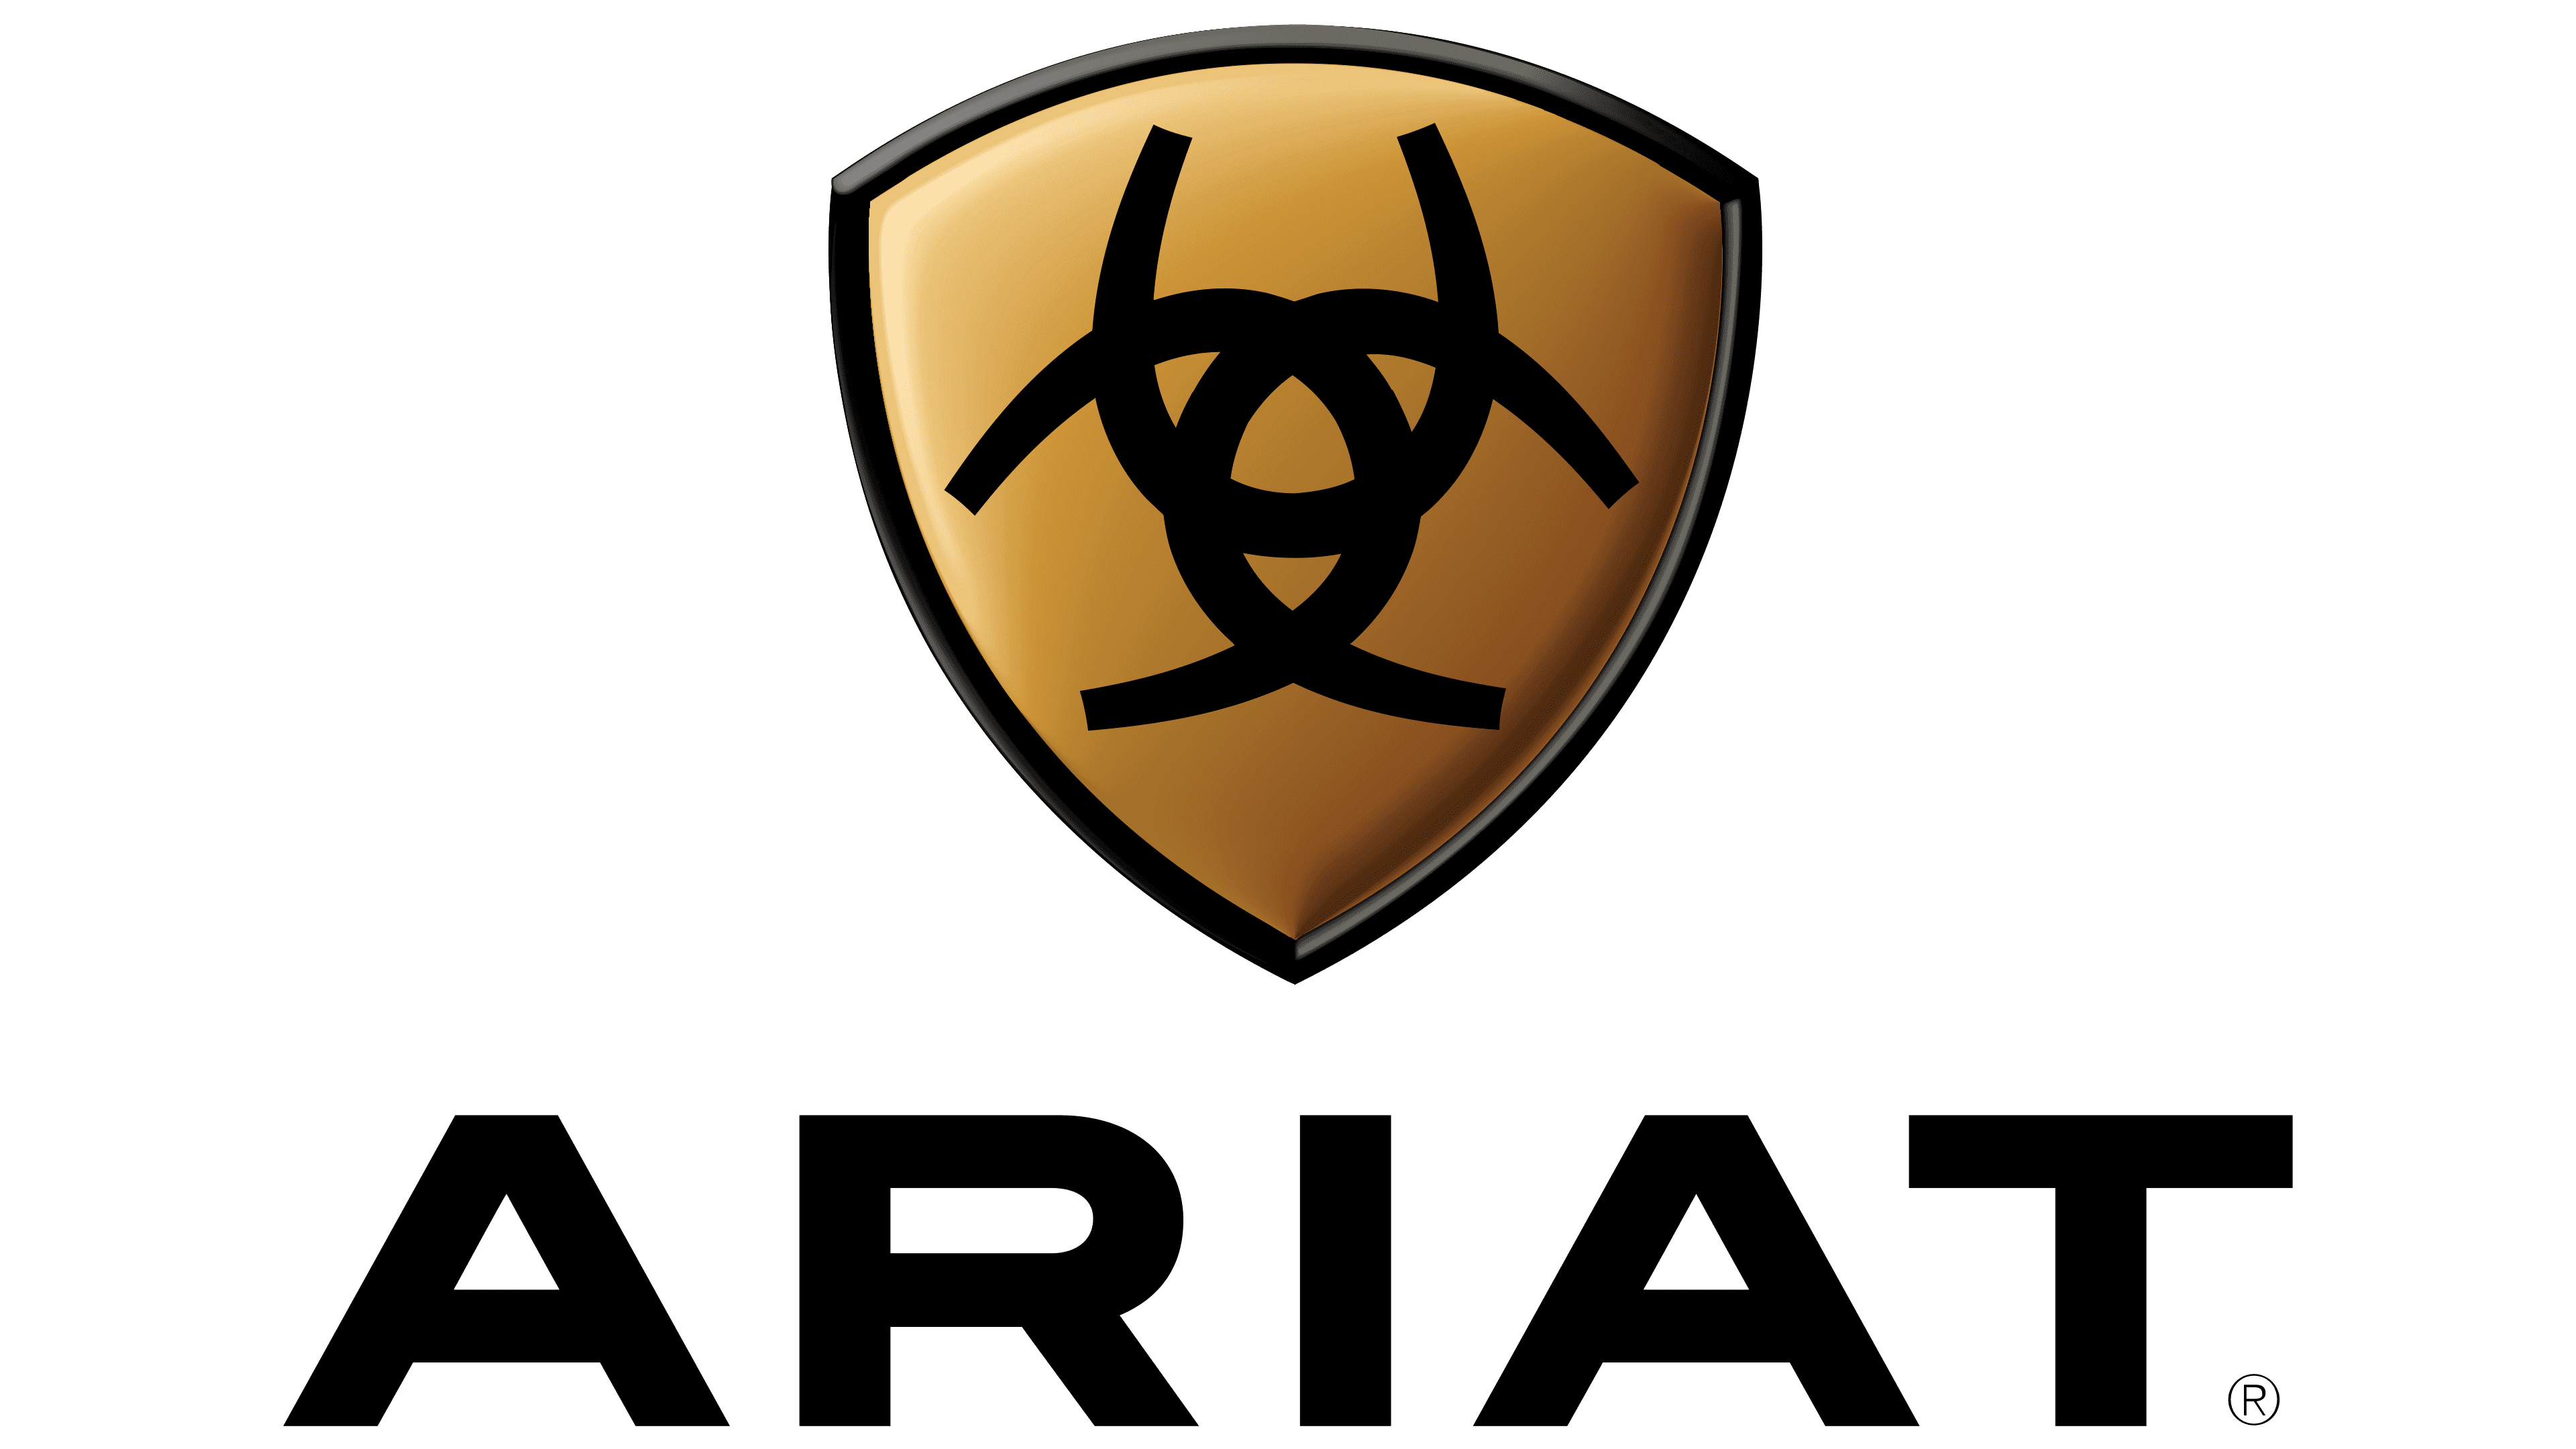 ariat boots logo - Today's Deals - Up To 66% Off